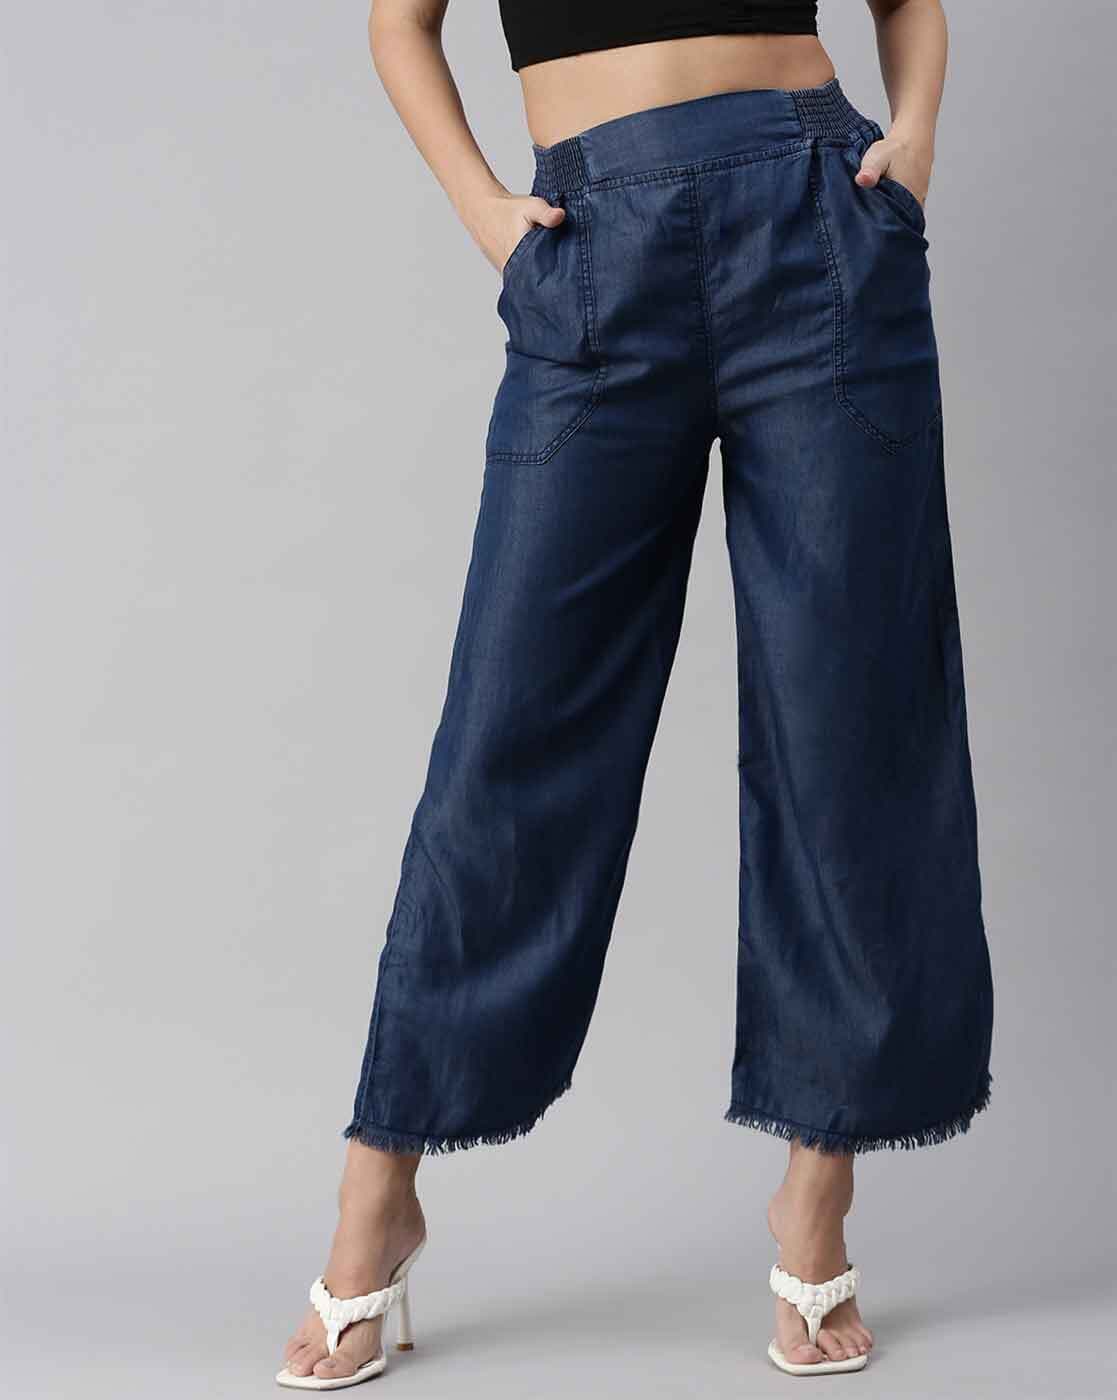 PACK OF 2 Women Jeans Knotted Elastic Waist Wide Leg Denim Palazzo Pants  Blue at Rs 650 / 2 Piece in Delhi